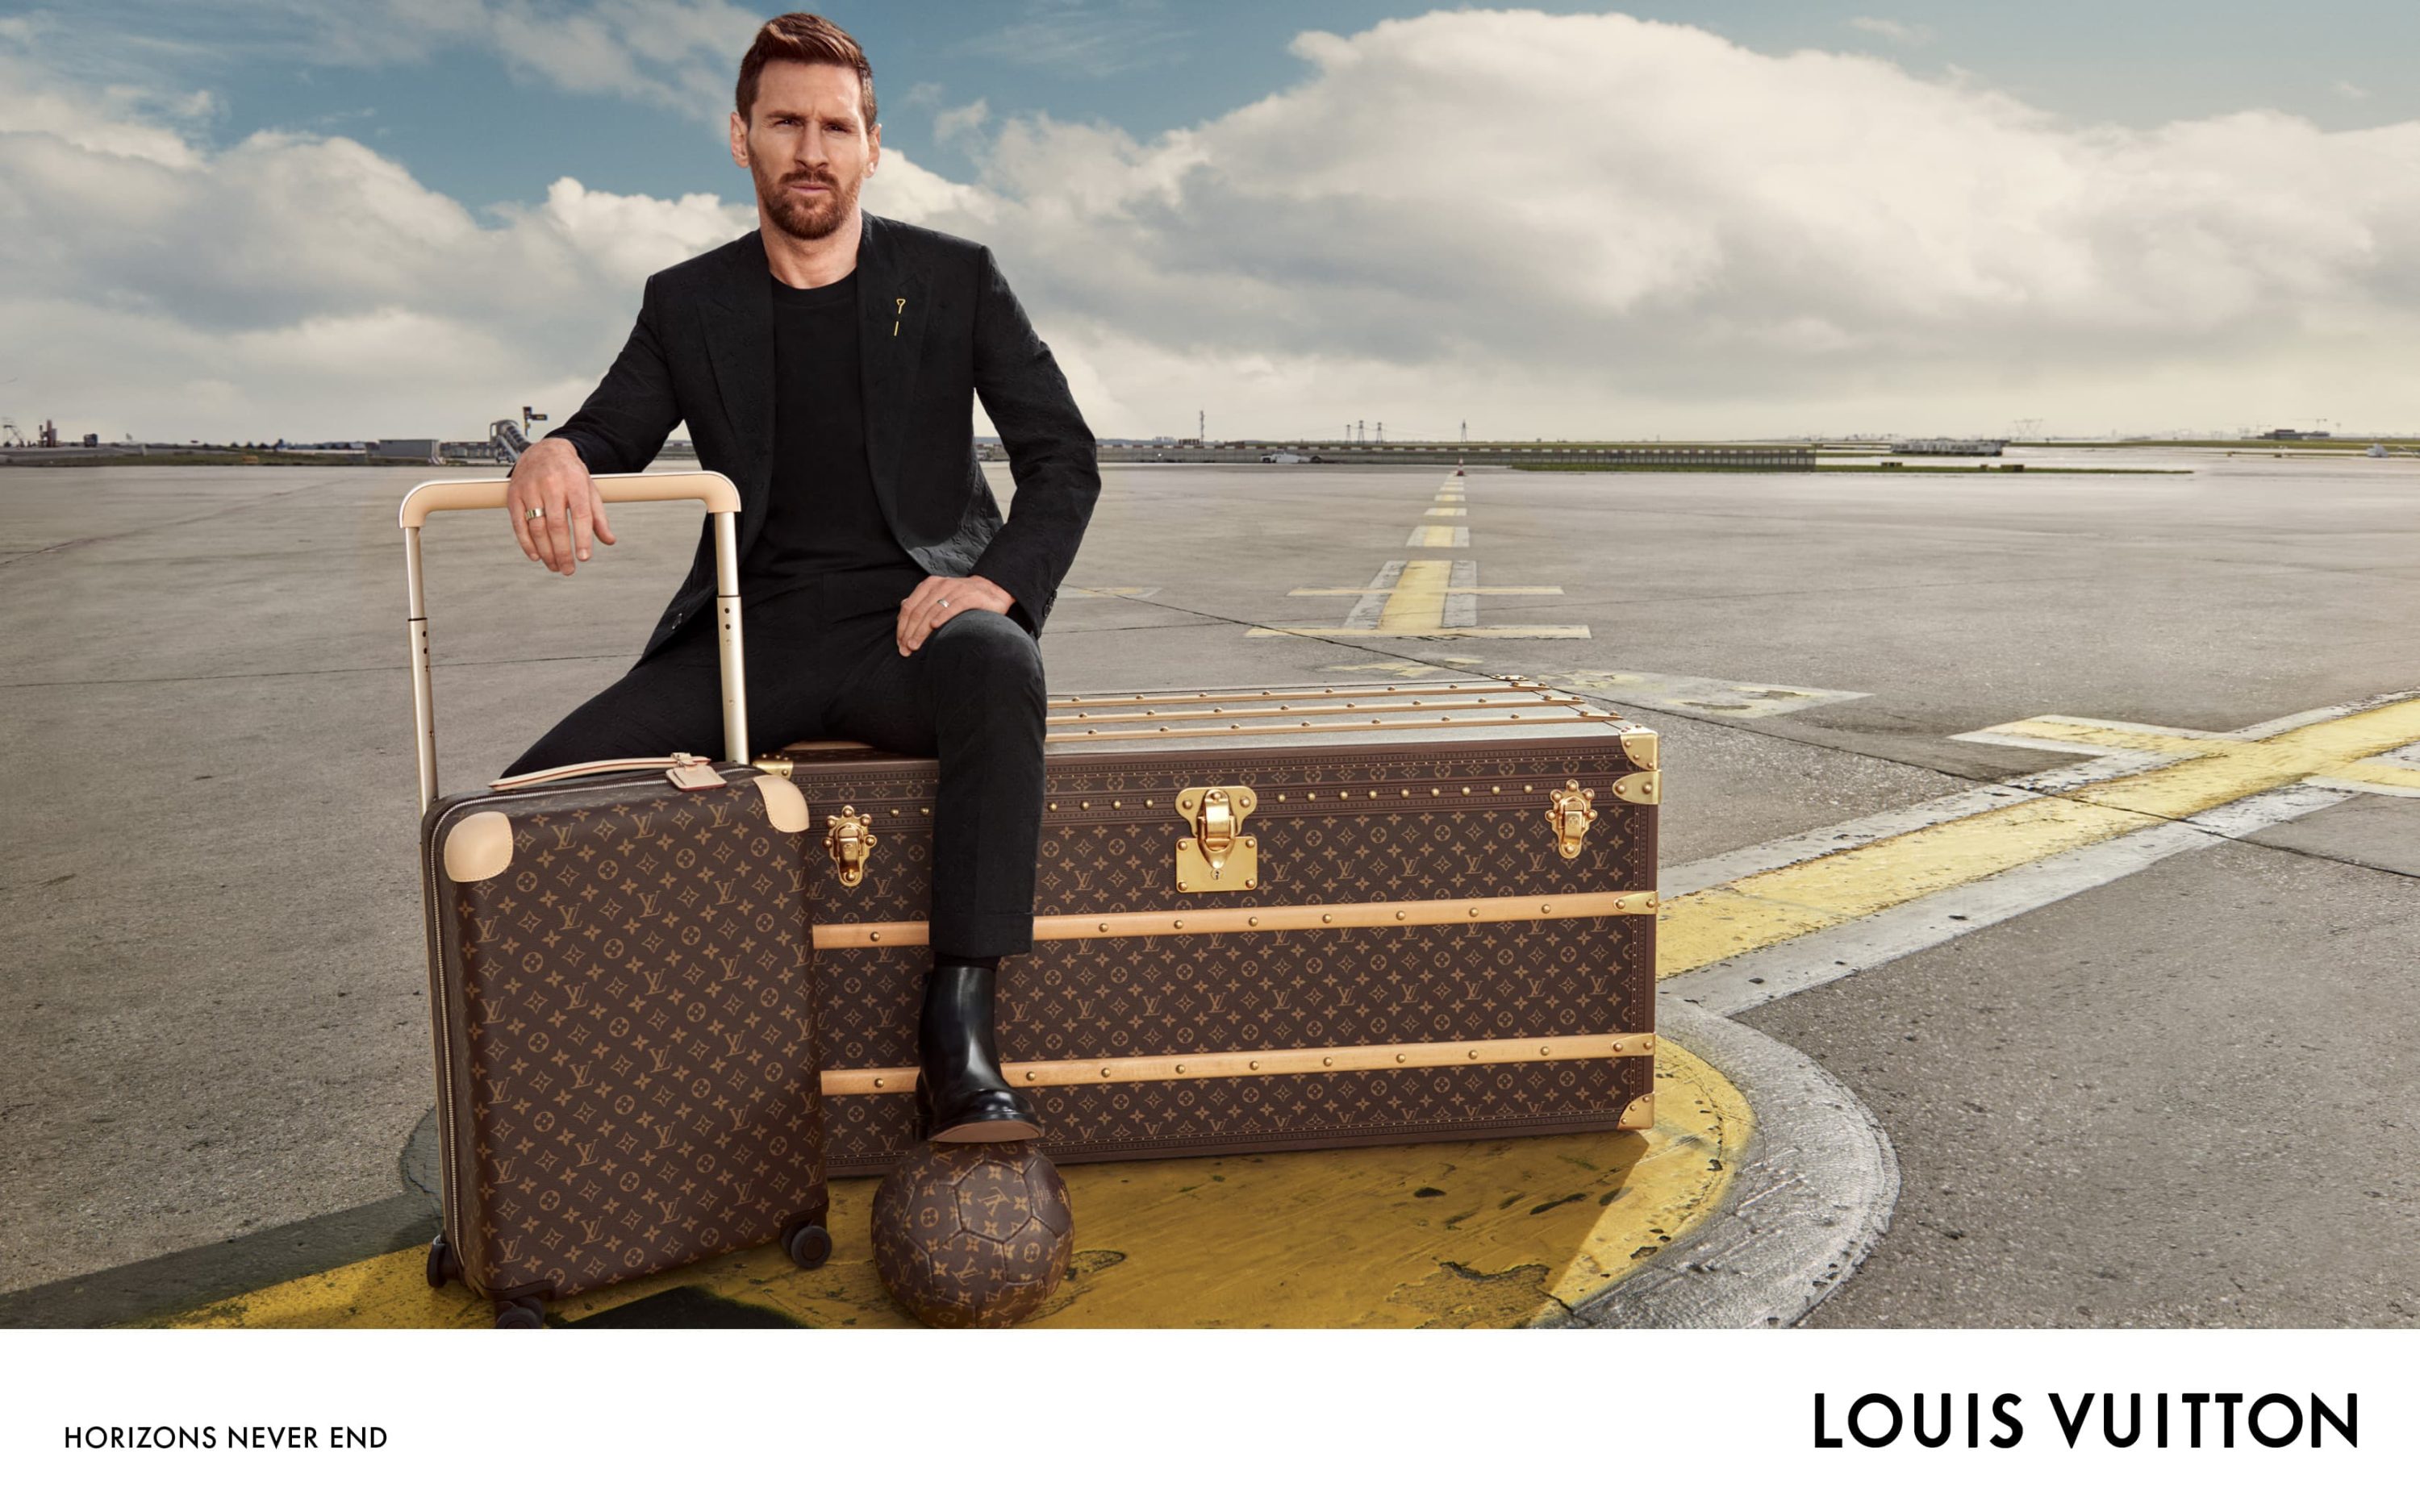 Louis Vuitton: Lionel Messi Stars In The New Louis Vuitton “Horizons Never  End” Travel Campaign - Luxferity